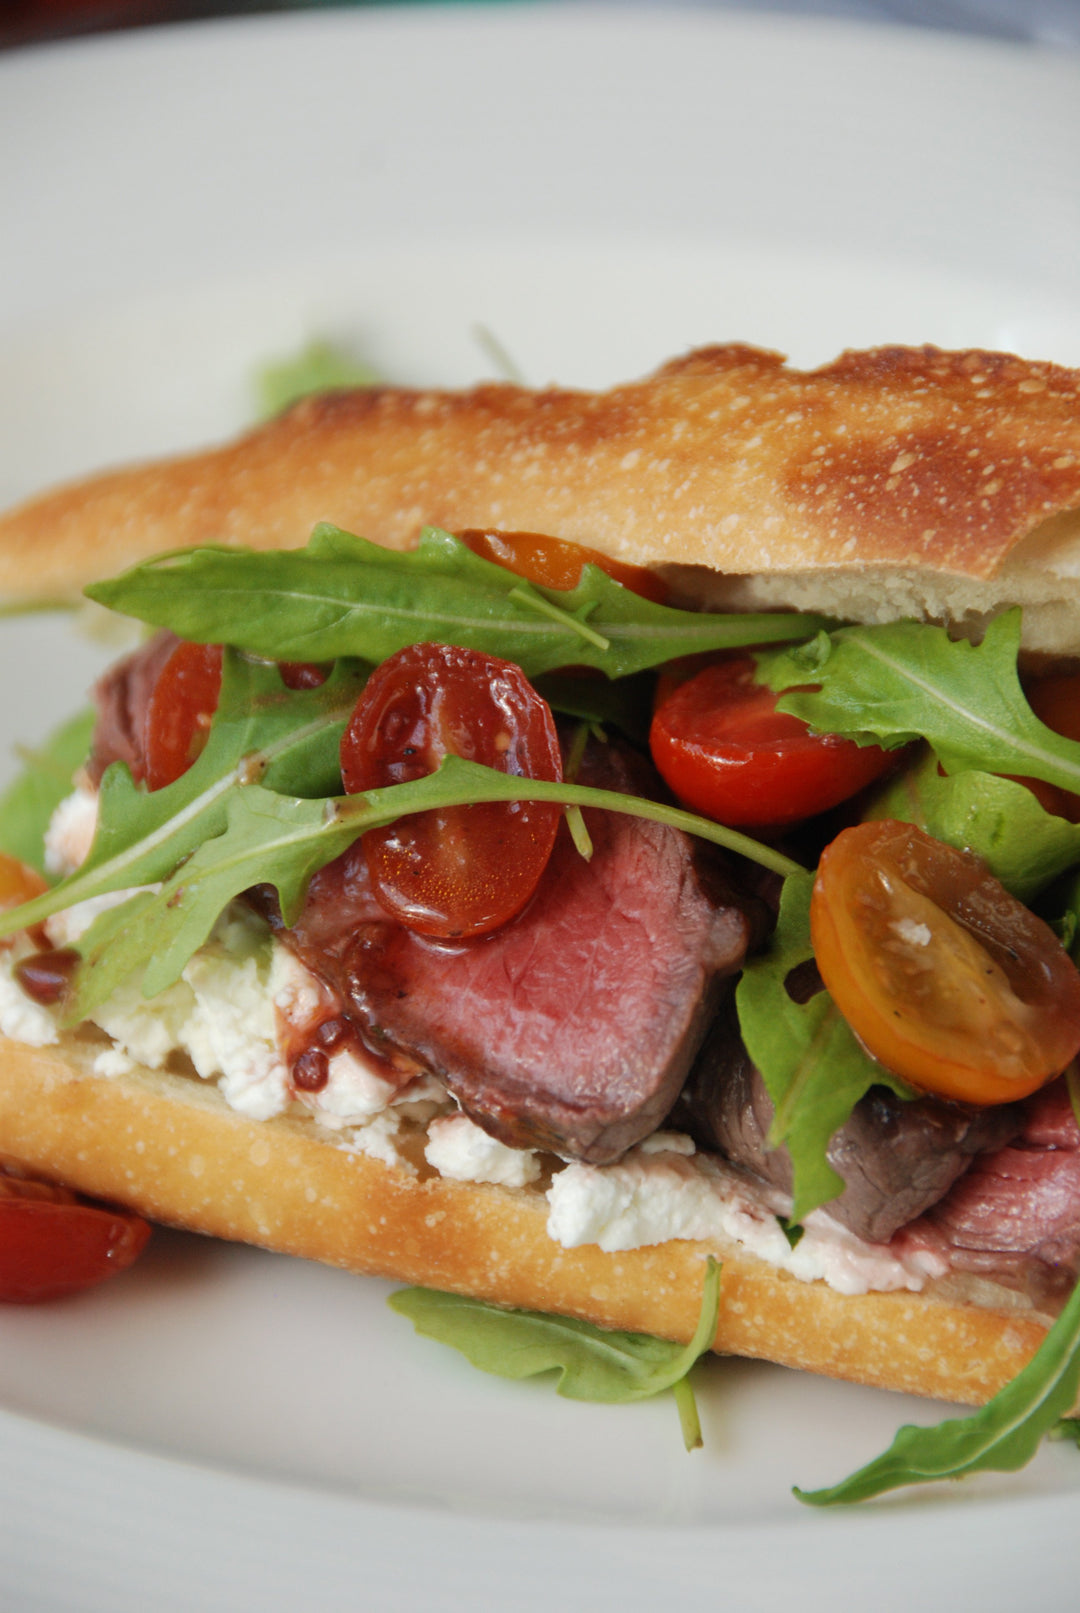 Steak Sandwich with Caramelized Red Wine Tomato Relish